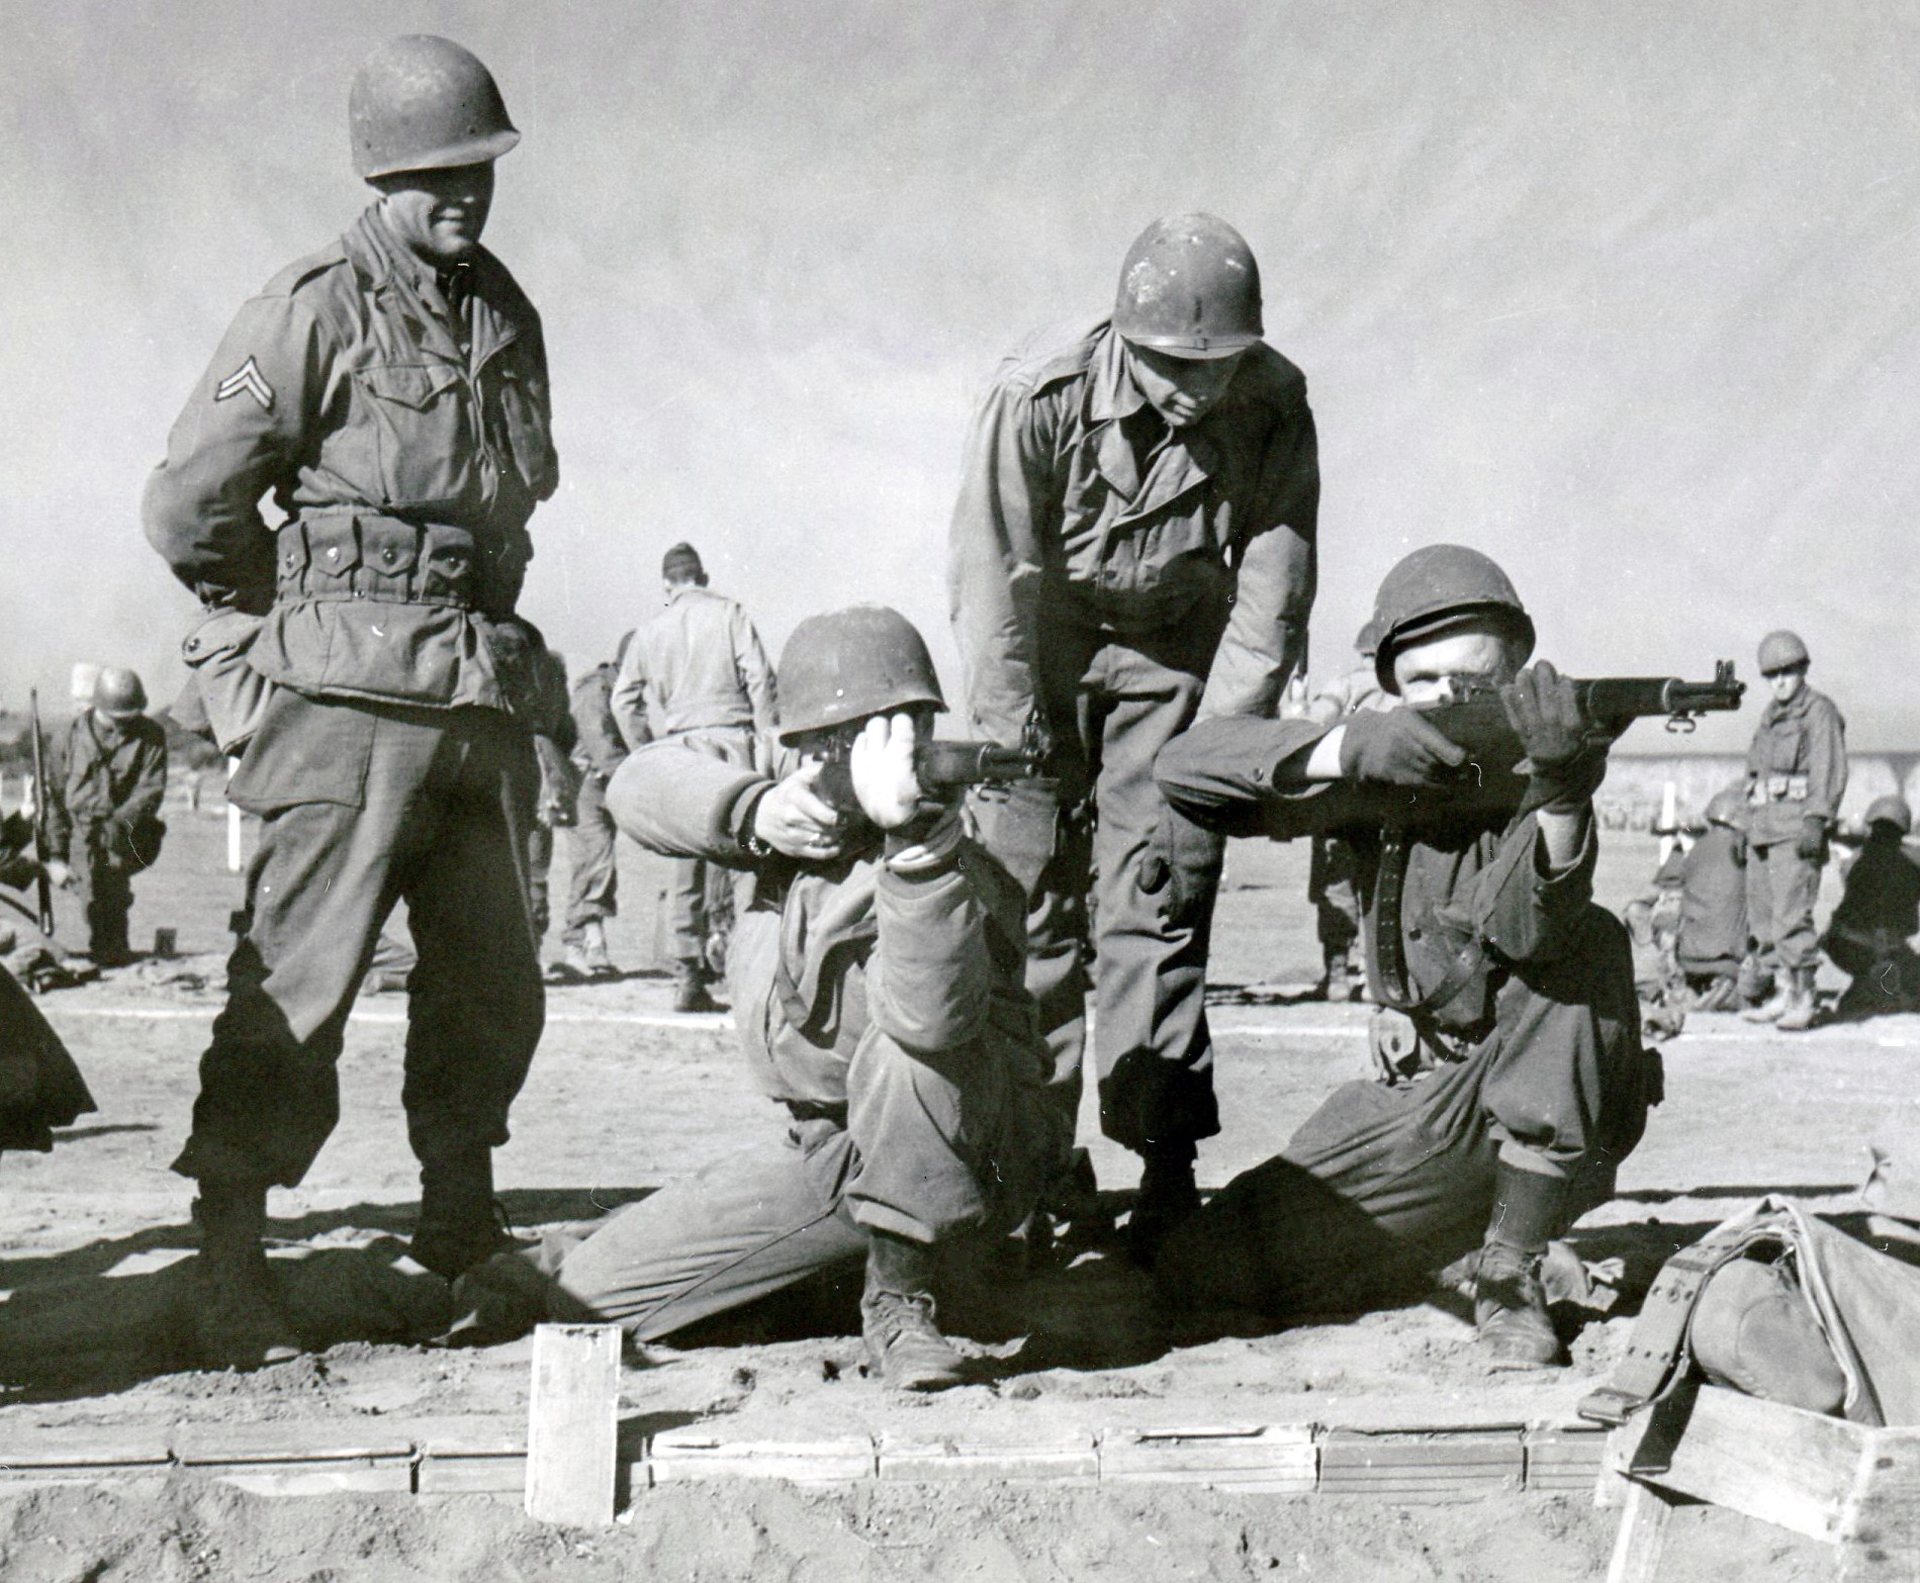 Advanced marksmanship training with standard infantry weapons, particularly the M1 rifle, proved essential as replacement troops filled the ranks. Italy, spring 1945.